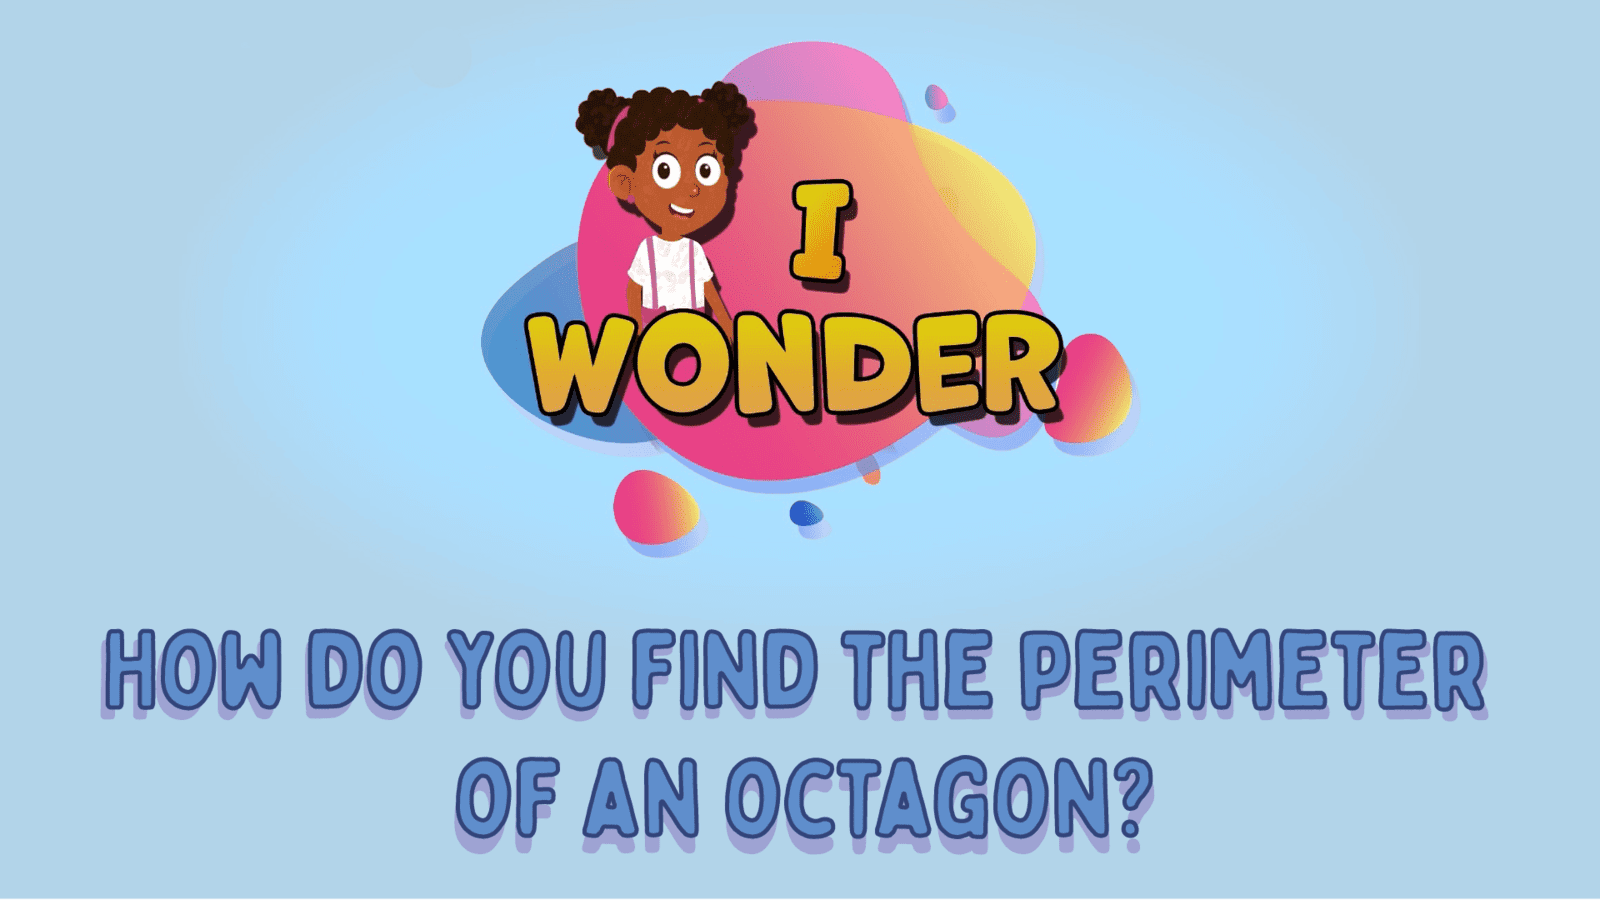 How Do You Find The Perimeter Of An Octagon?